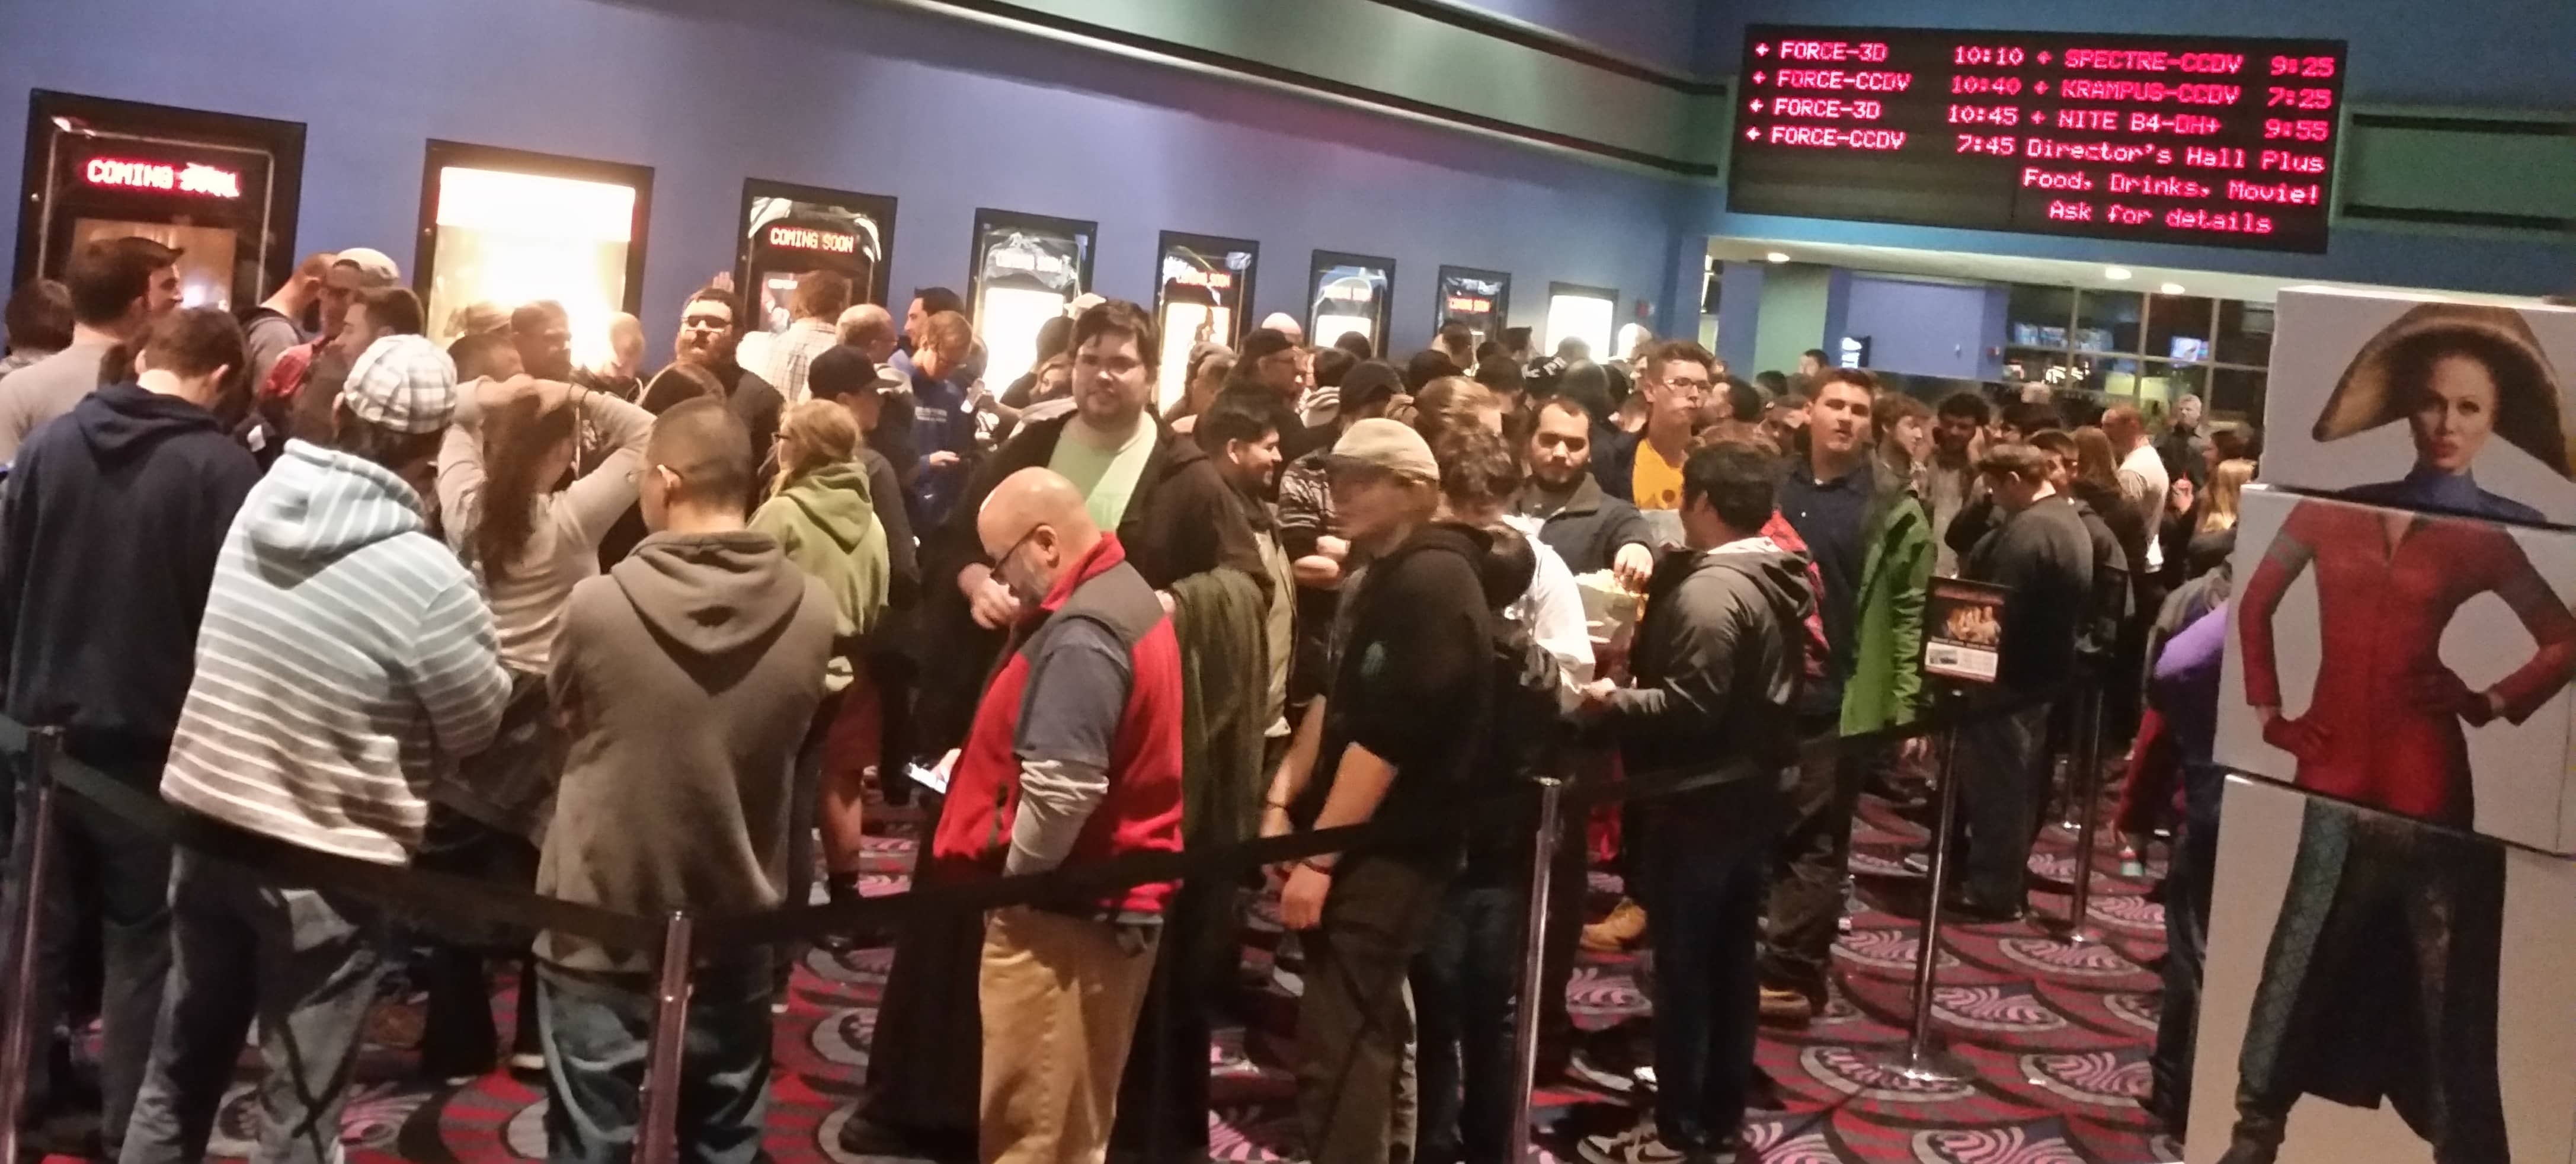 [CREDIT: Phil Nemirow] Later showings of the movie drew much larger crowds at Showcase Cinemas on Quaker Lane.